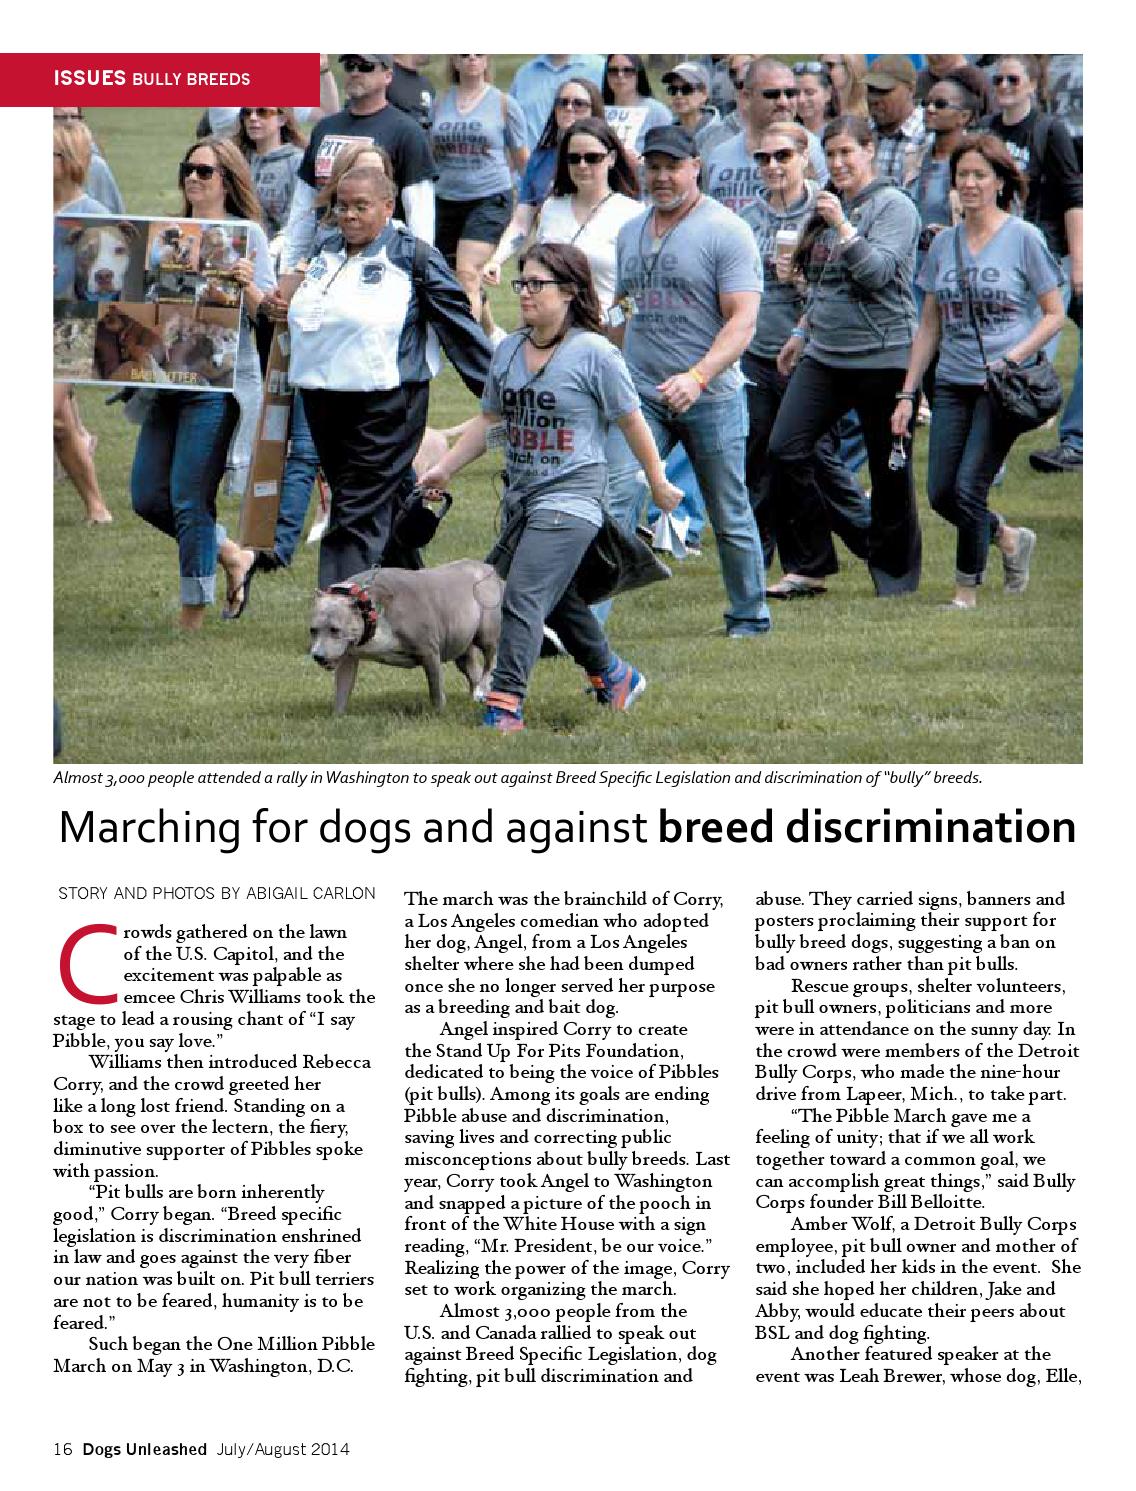 Dogs Unleashed Magazine: DC PIBBLE March inspires upcoming Michigan march!